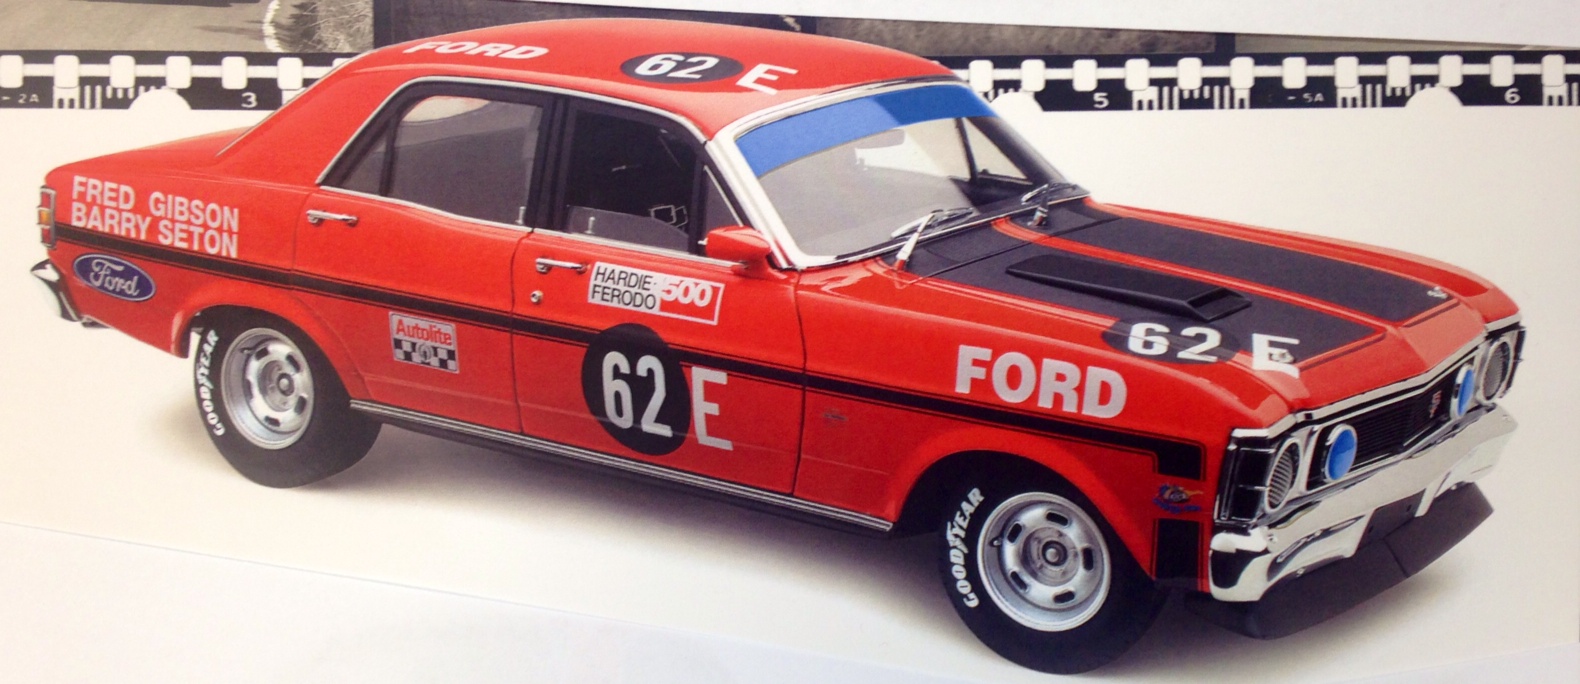 PRE ORDER - Ford XW Falcon GT-HO Phase 3 Fred Gibson & Barry Seton 1970 Die Cast Model Car 1:18